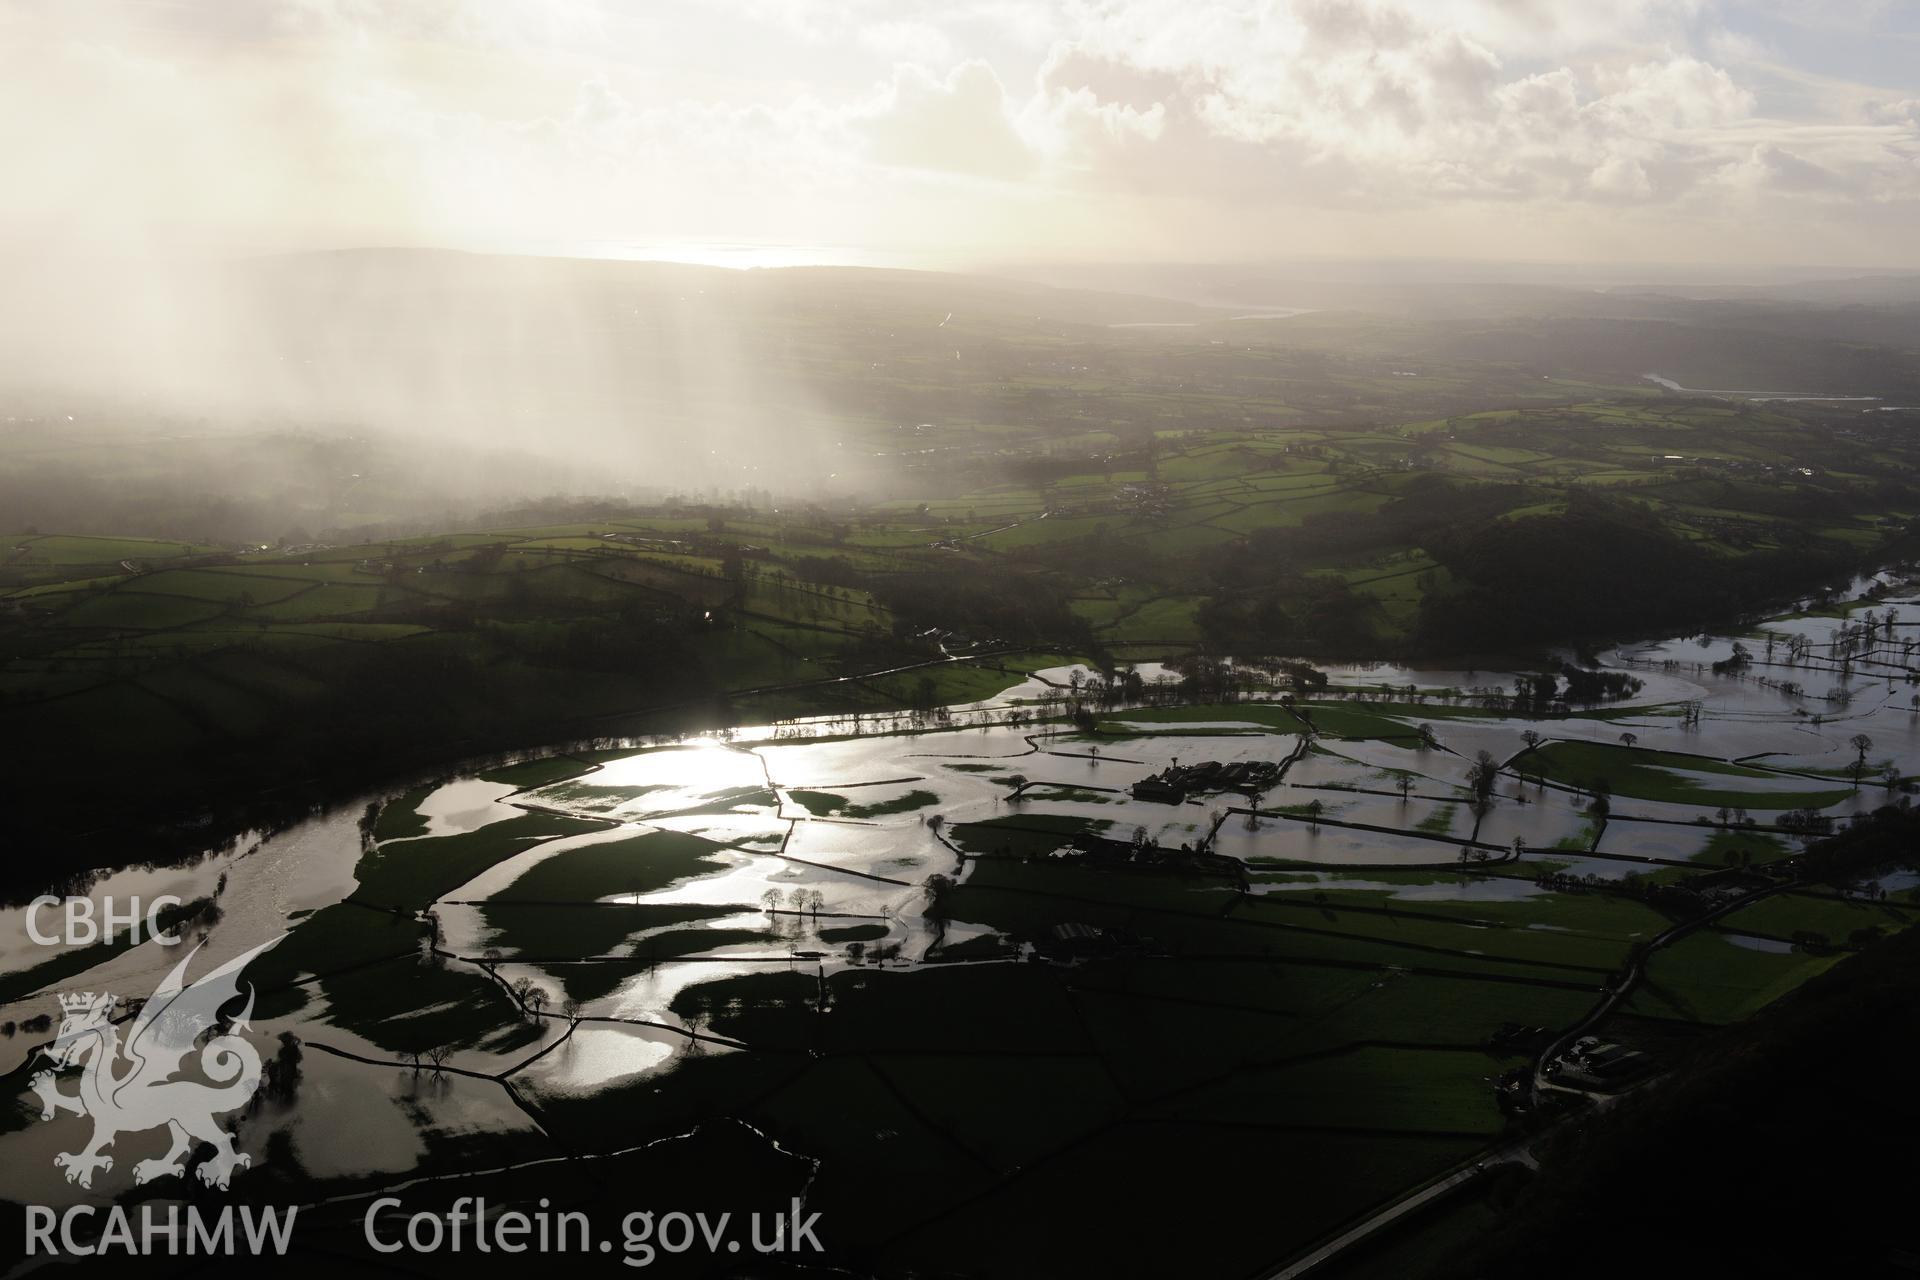 RCAHMW colour oblique photograph of Glantowy Fawr farm, with flooding, view from north-east. Taken by Toby Driver on 23/11/2012.